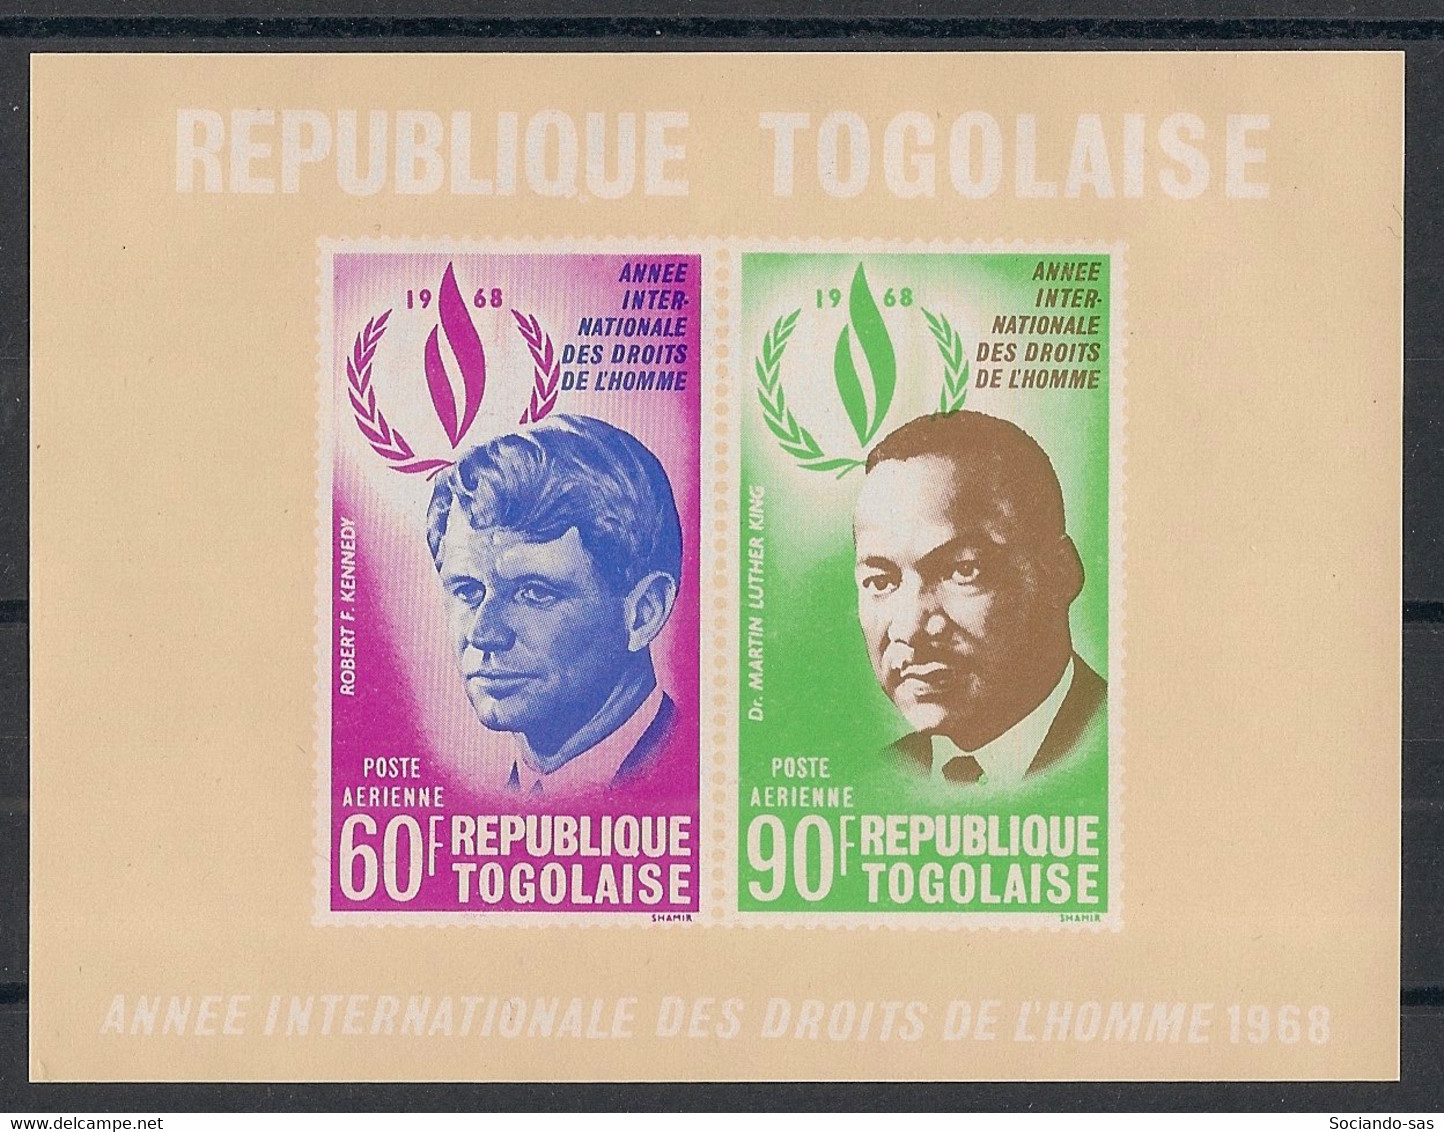 TOGO - 1969 - Bloc Feuillet BF N°Yv. 35 - Human Rights / Kennedy / Luther King - Neuf Luxe ** / MNH / Postfrisch - Martin Luther King